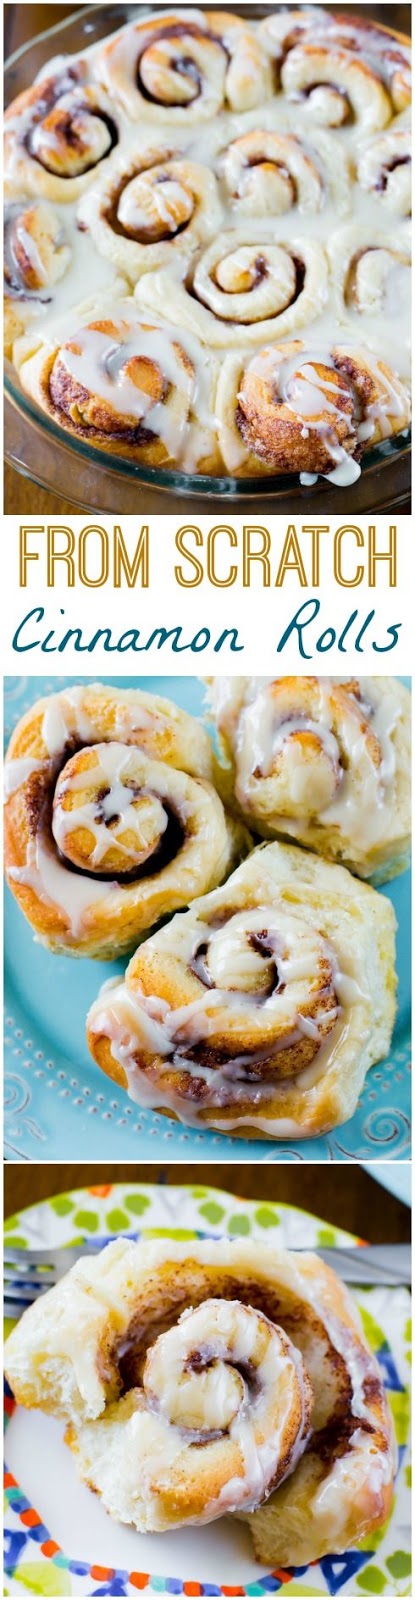 These Homemade Cinnamon Rolls are so simple! They're completely from scratch and will become your new favorite. | sallysbakingaddiction.com 